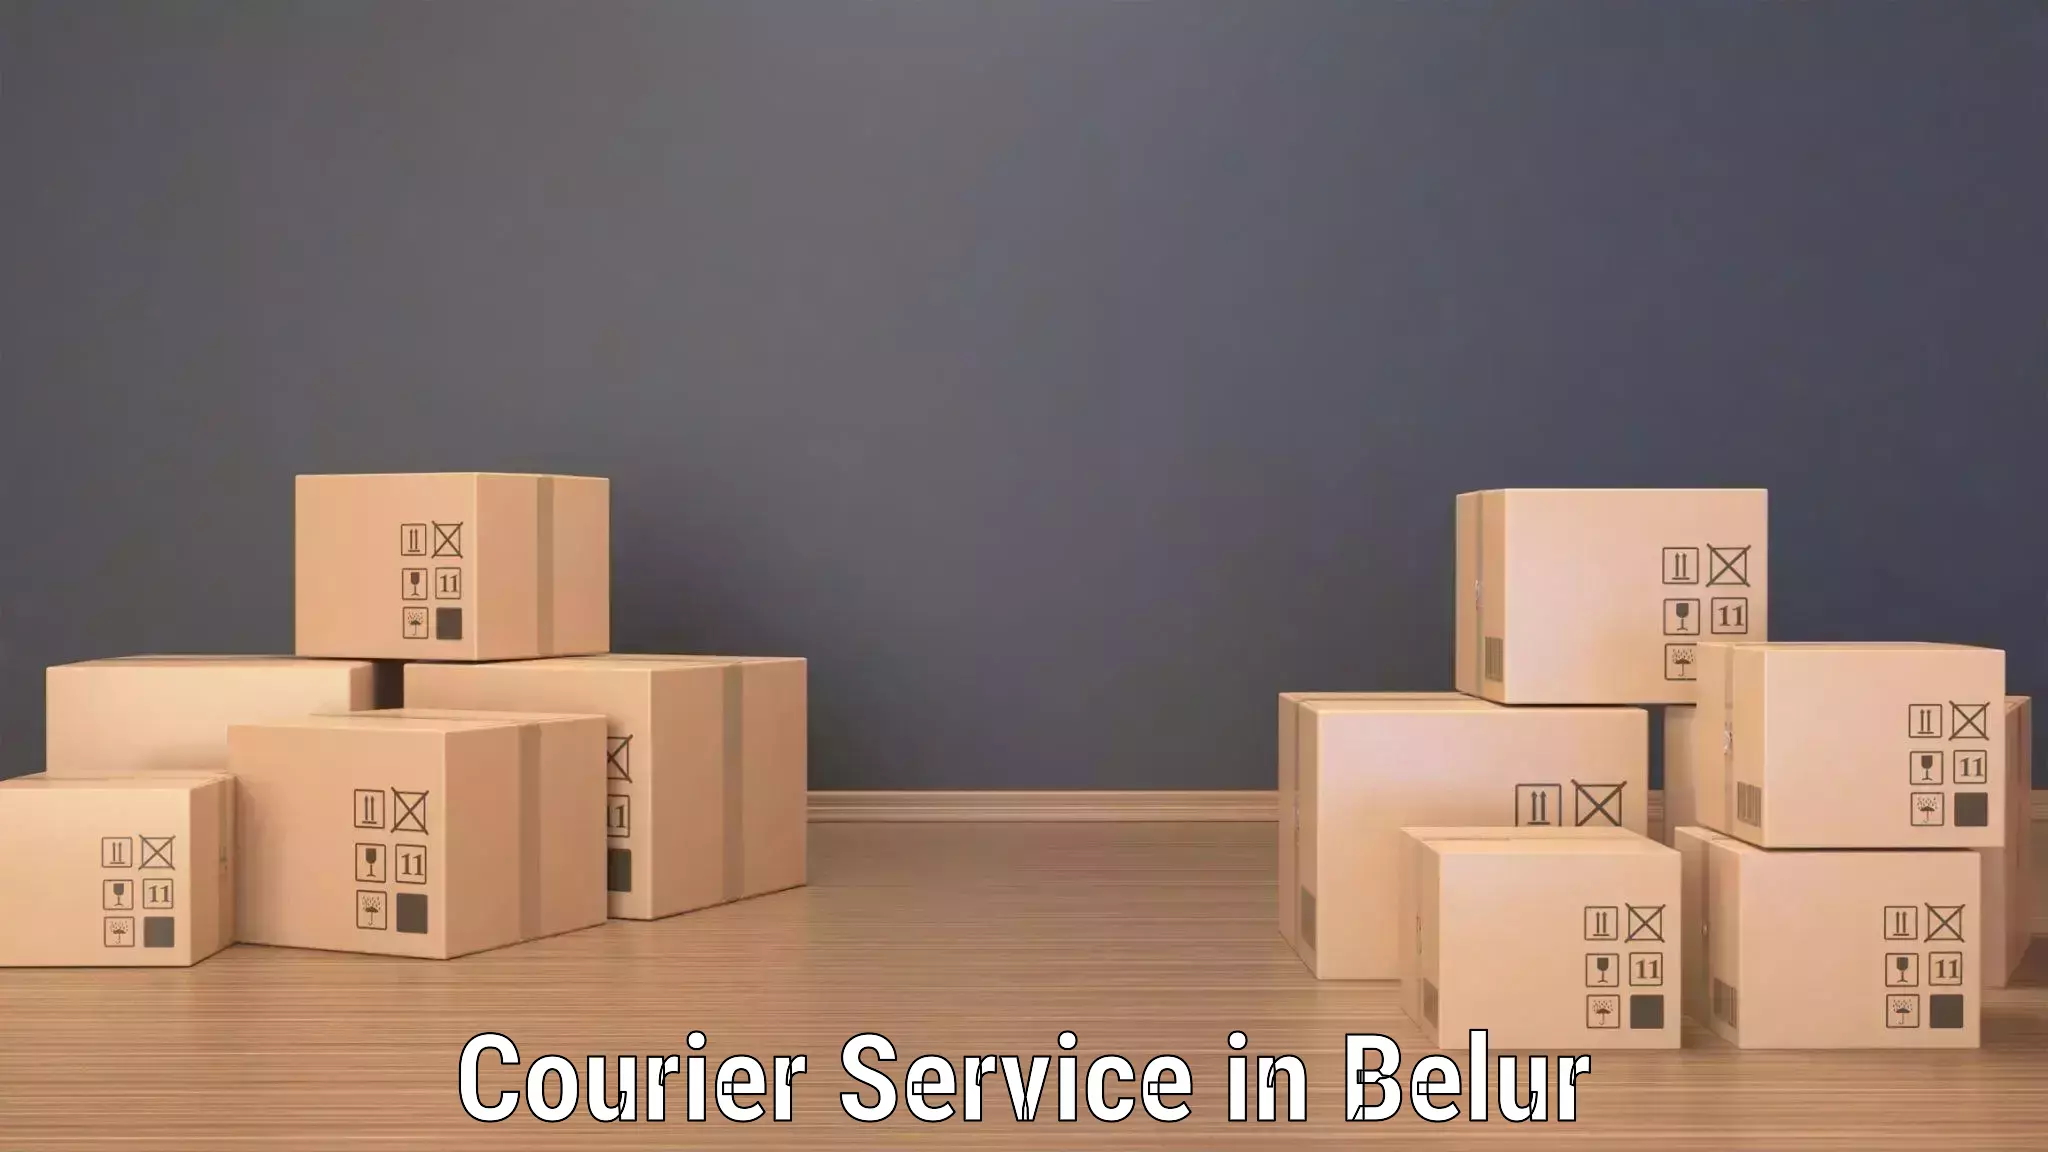 Customer-oriented courier services in Belur